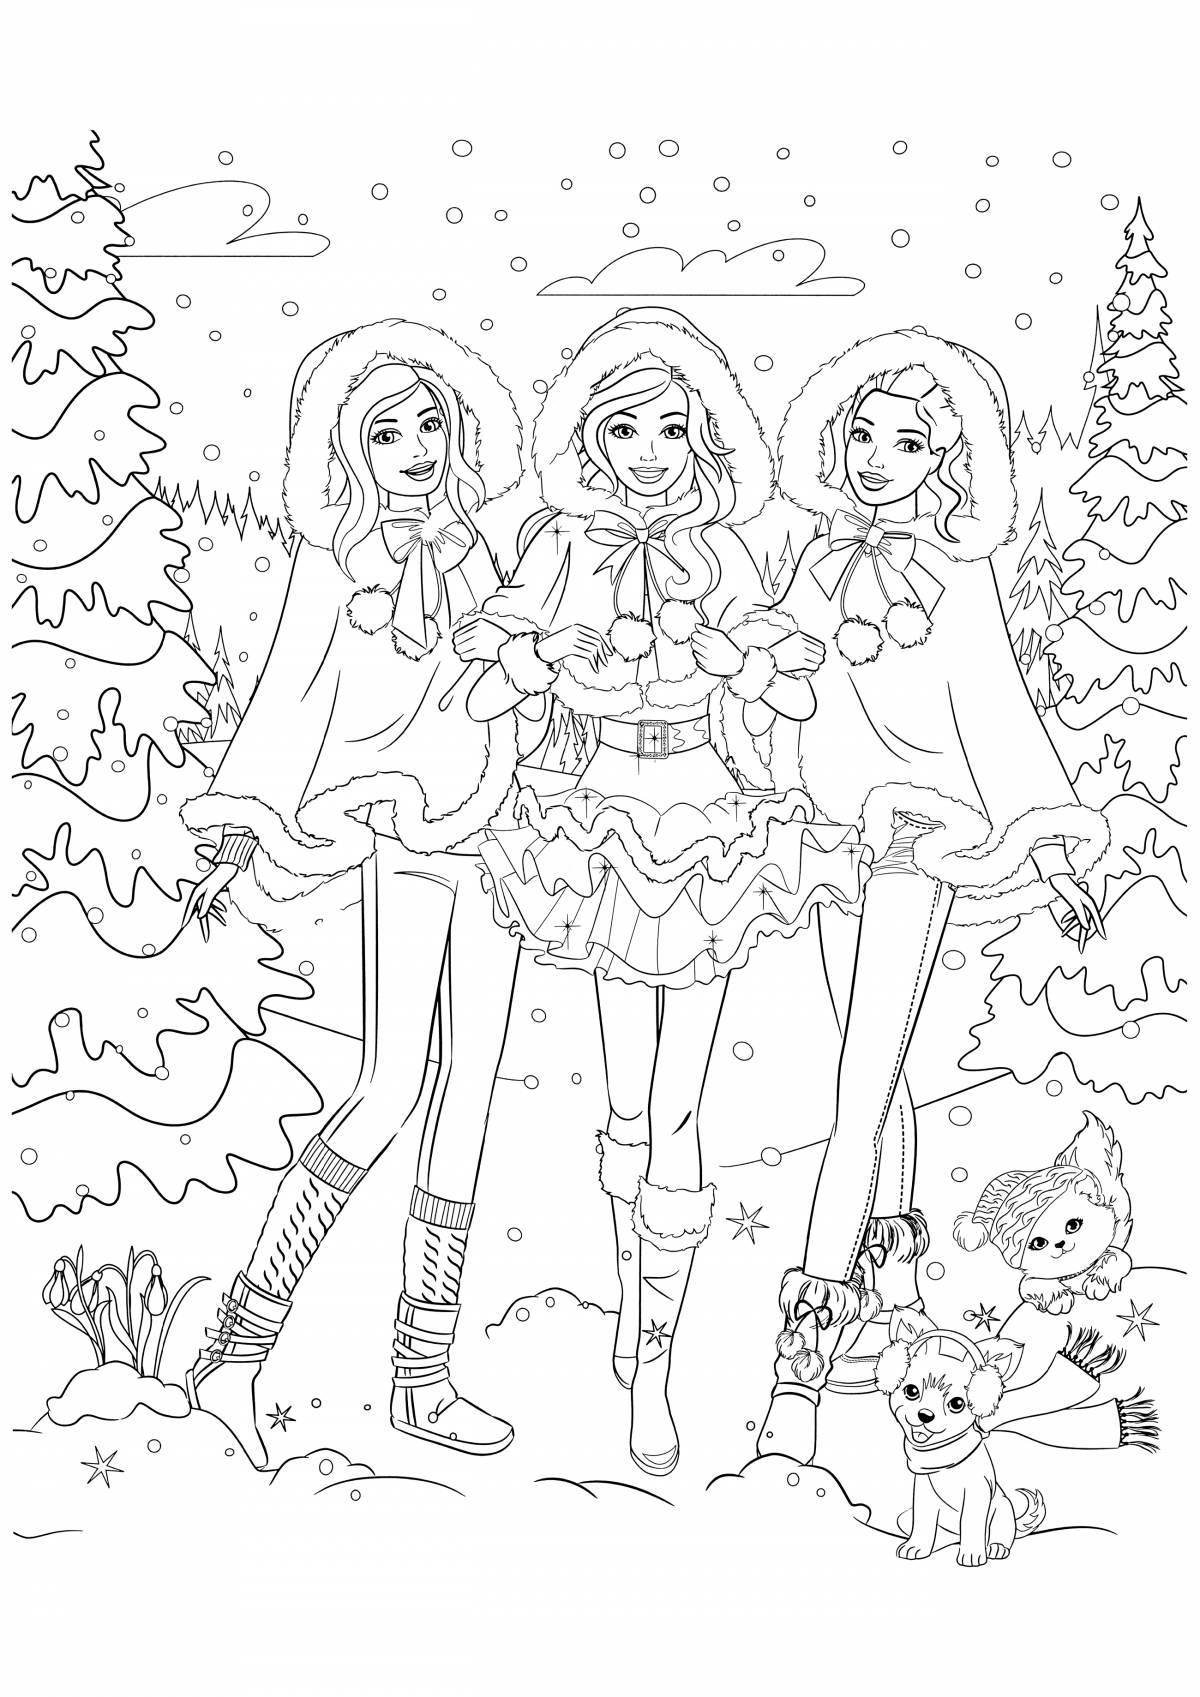 Blissful winter coloring for girls